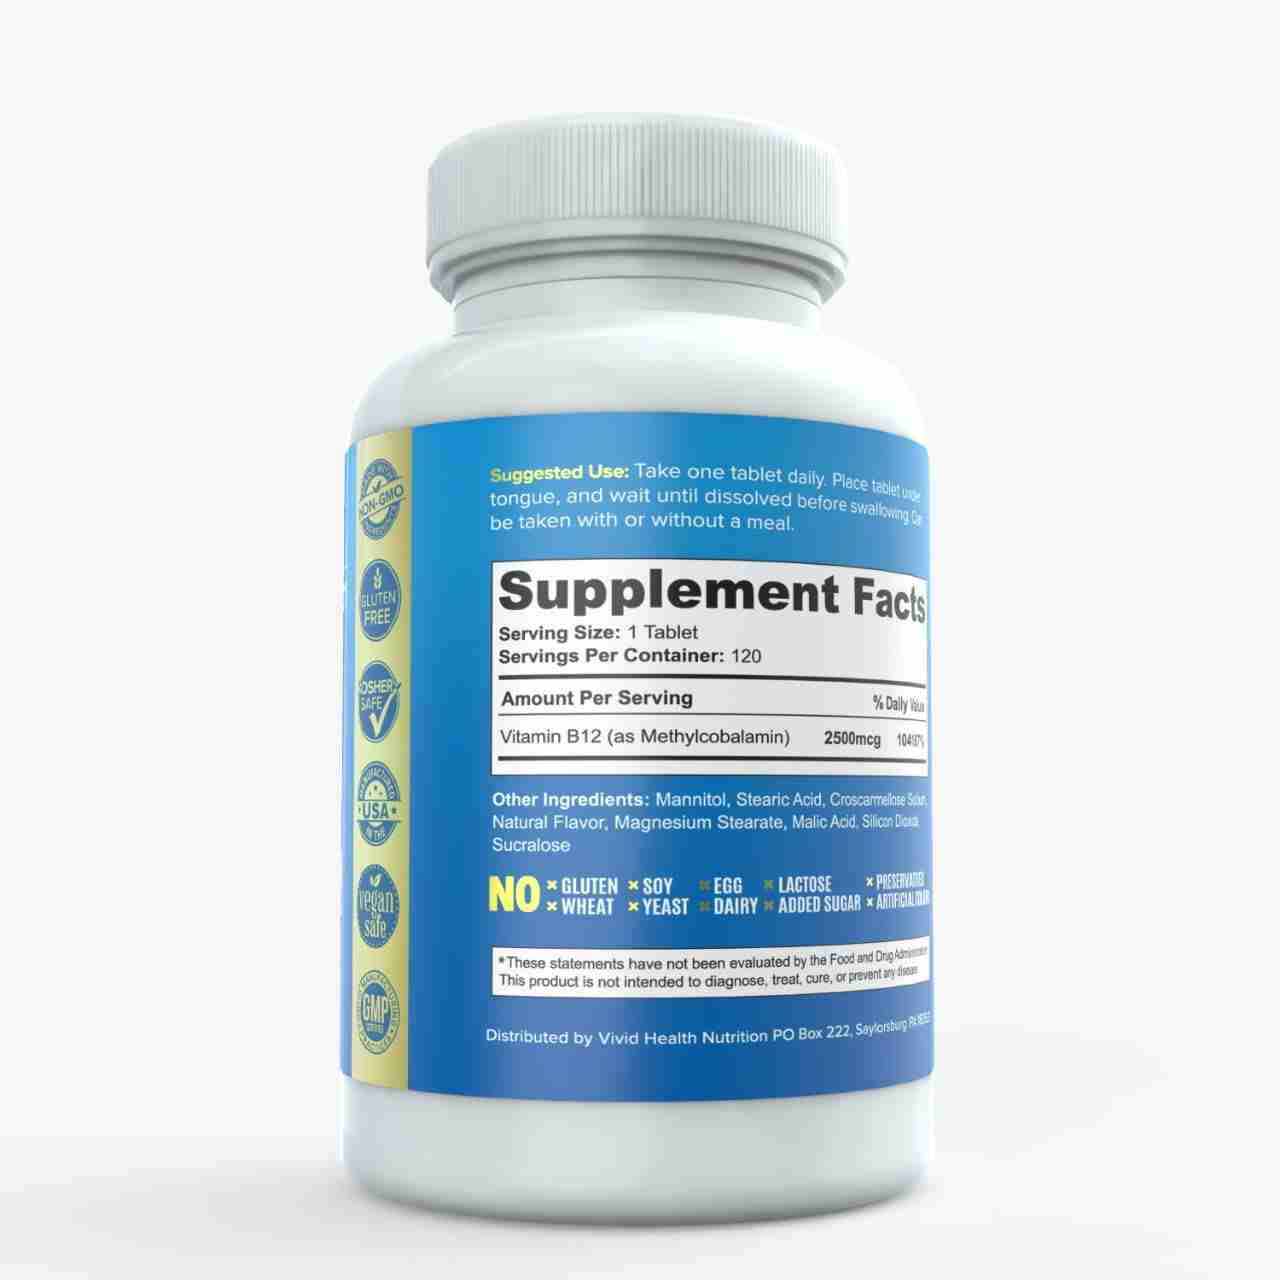 b12-vitamins with discount code